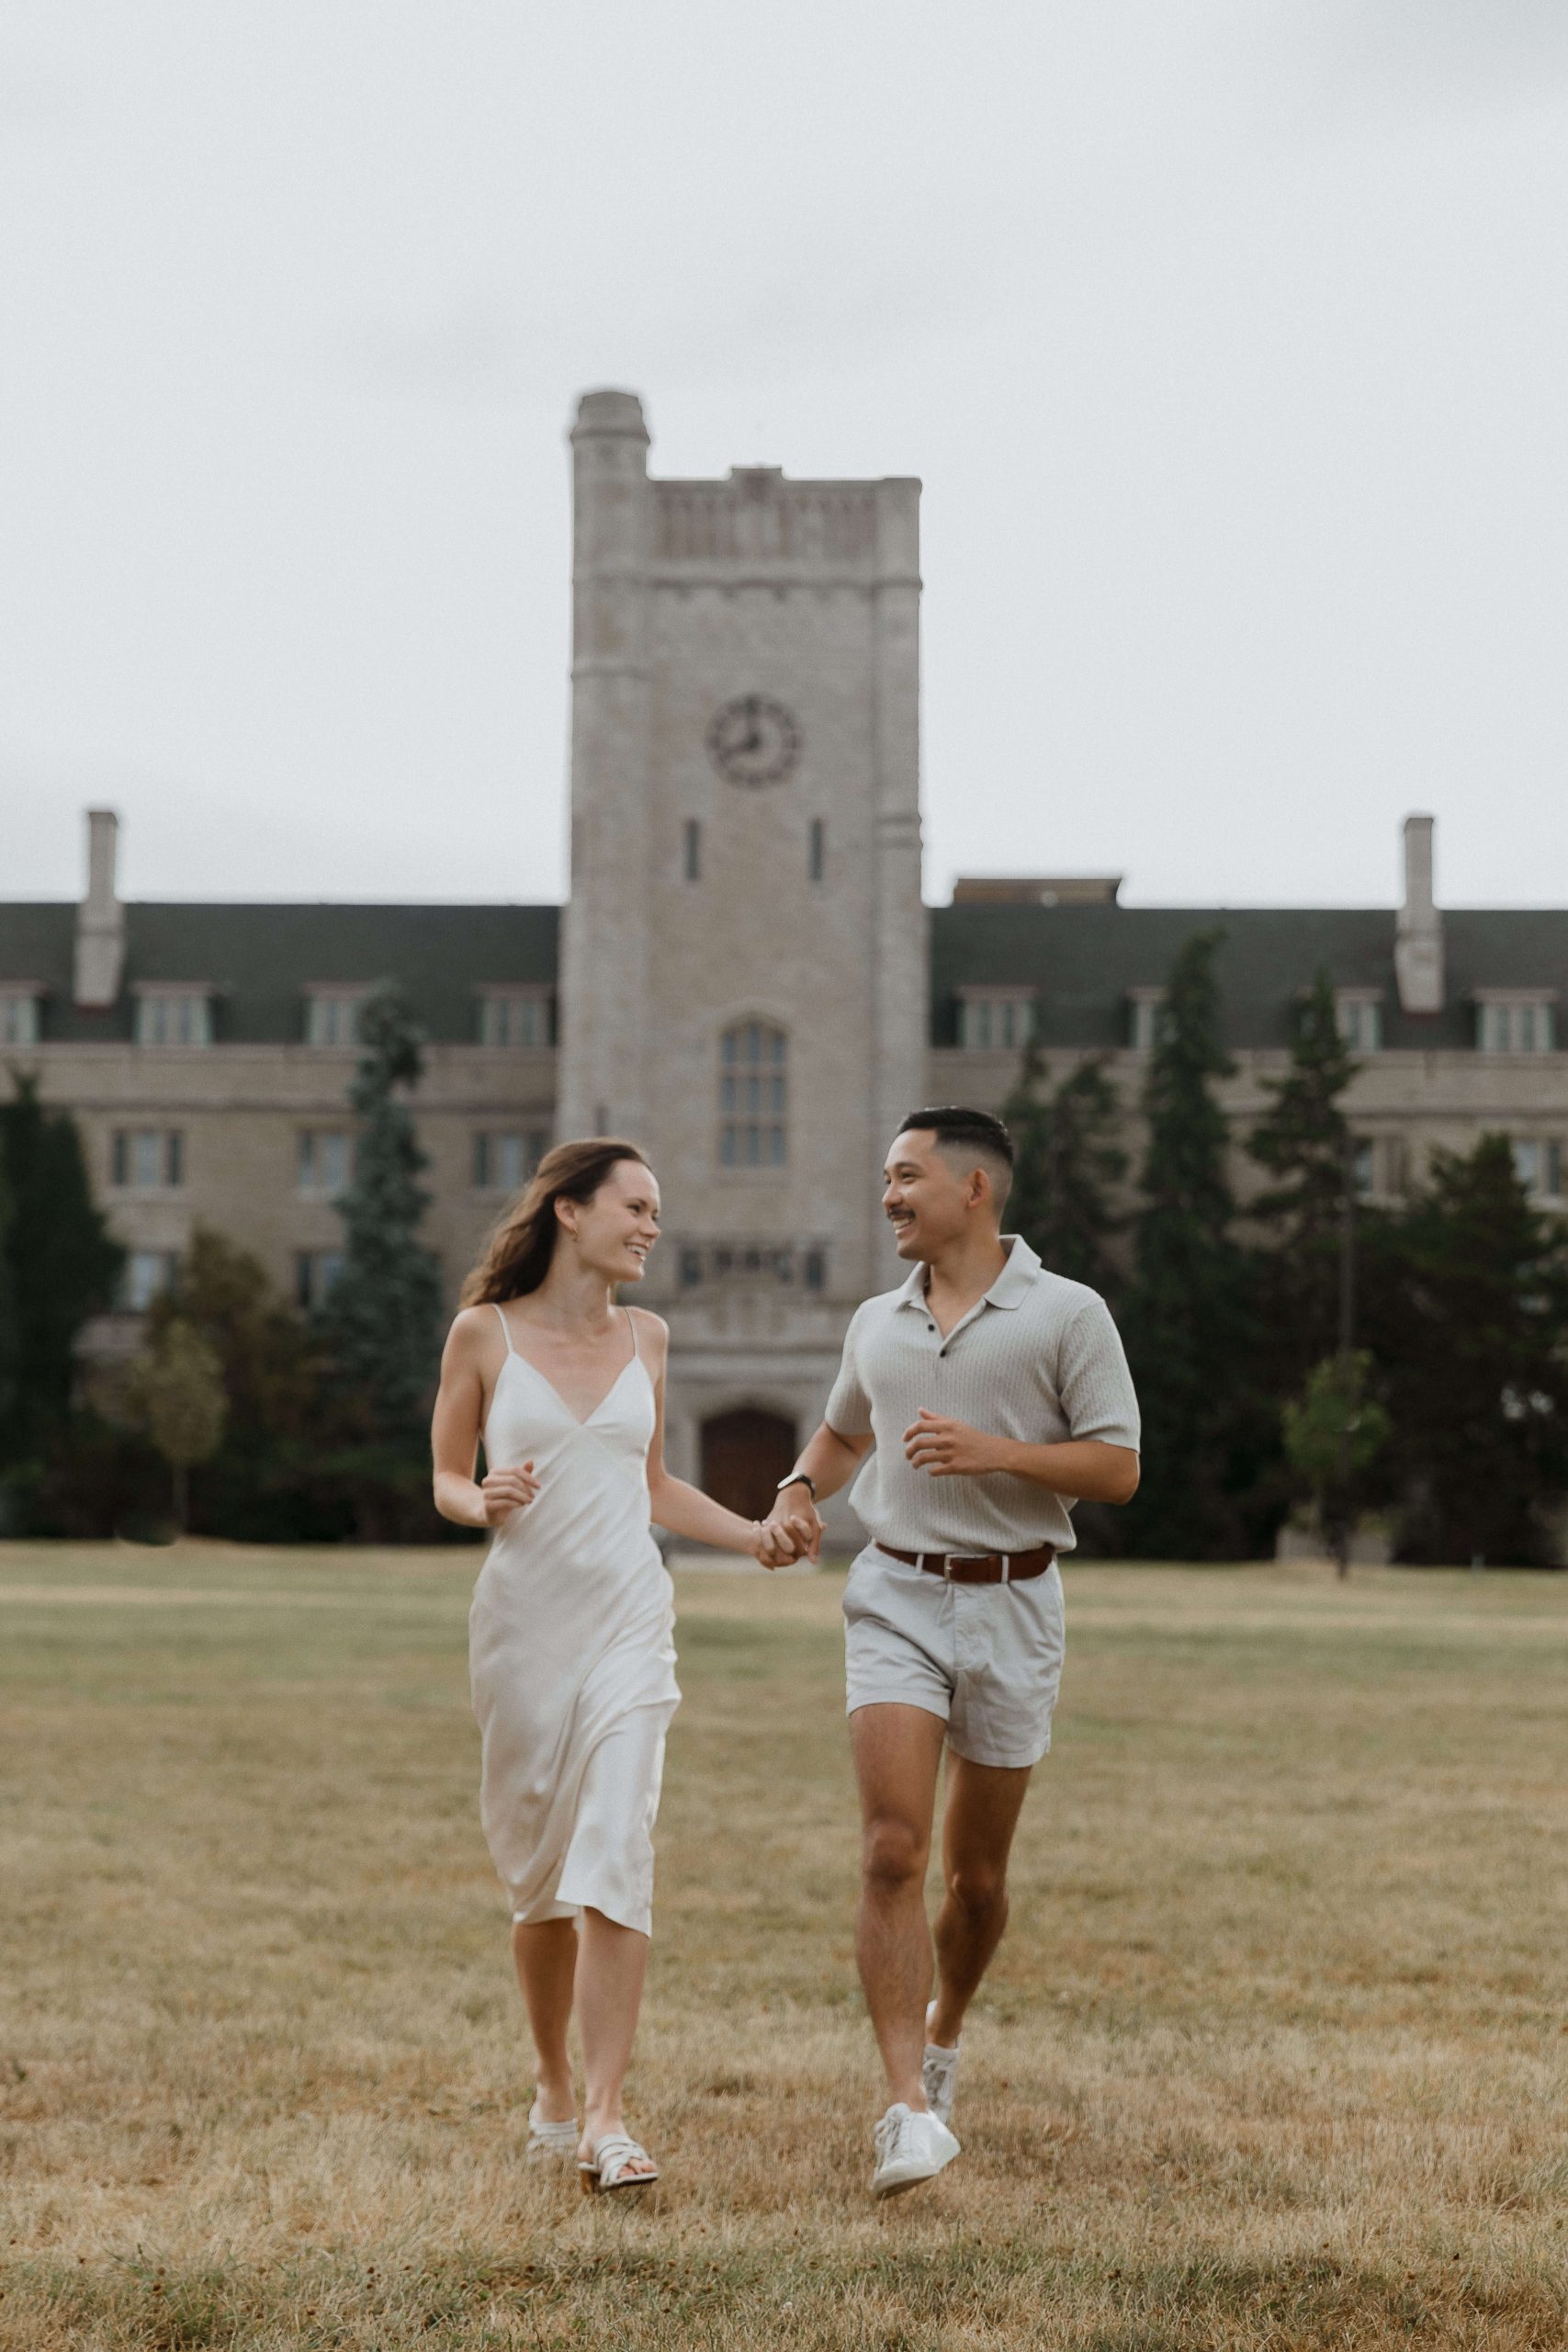 Engagement photos at Guelph University outside the old buildings | Sonia V Photography couple running through university field